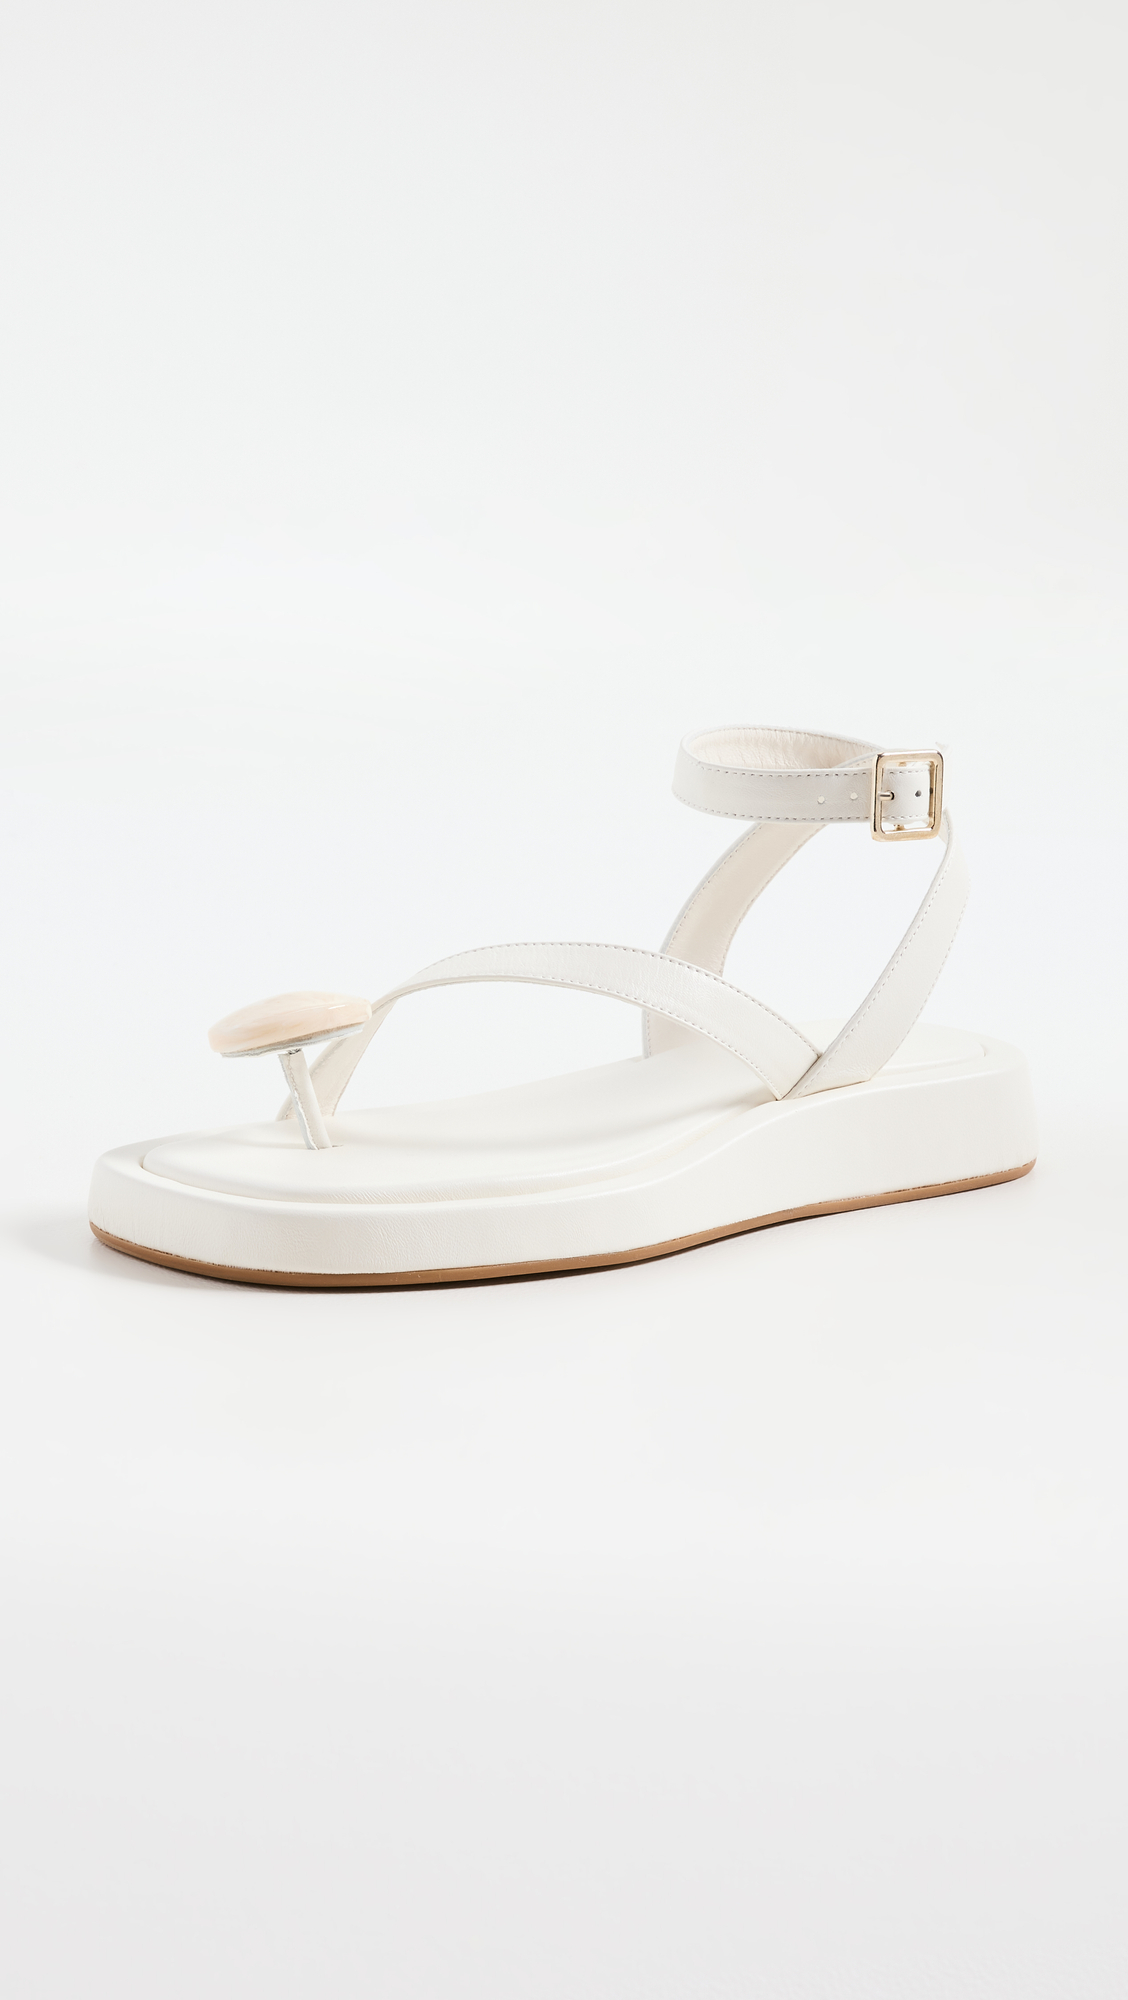 The Flatform Sandal Trend That's Taking Over This Summer | Who What Wear